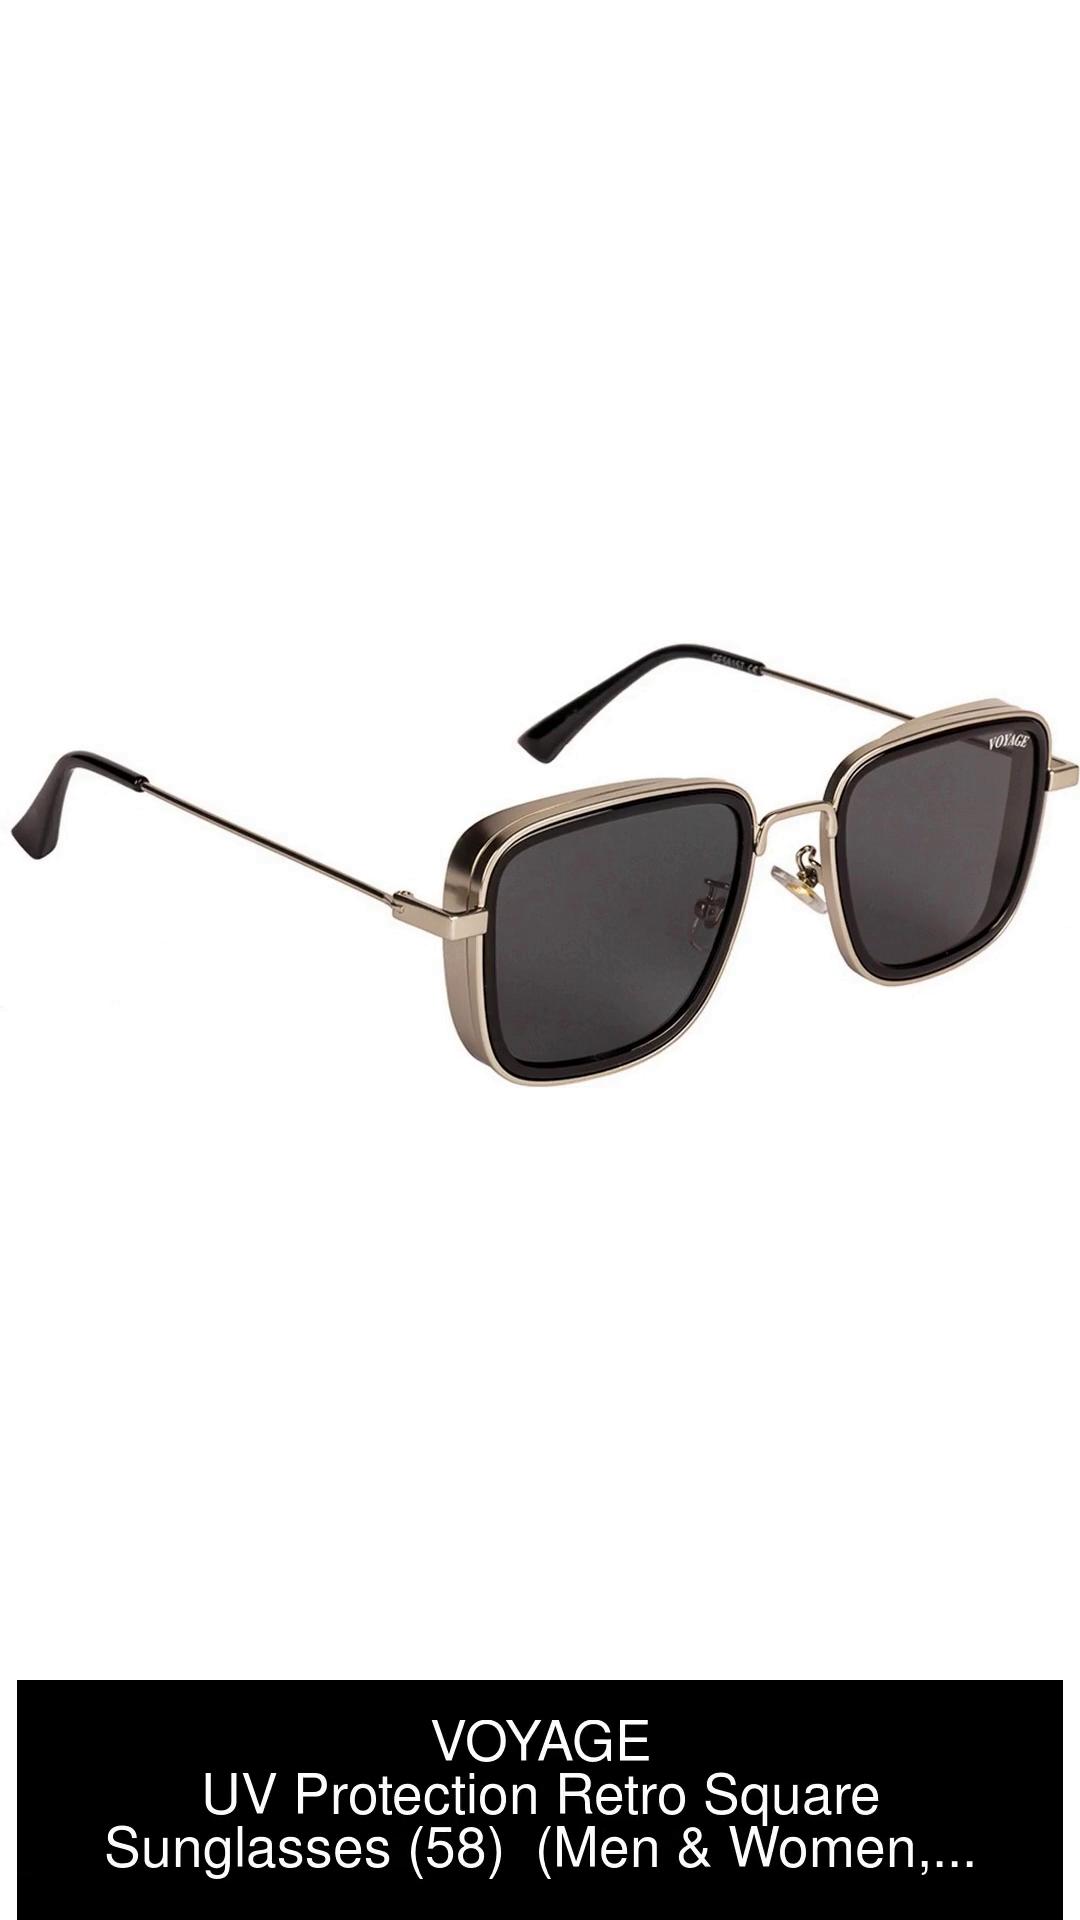 Summer Style Retro Square Cubitts Sunglasses For Women And Men Waimea L  Full Frame With Gradient Grey Lens In Black And Gold Fashionable Eyewear In  Random Box From Newbrandsunglasses, $46.64